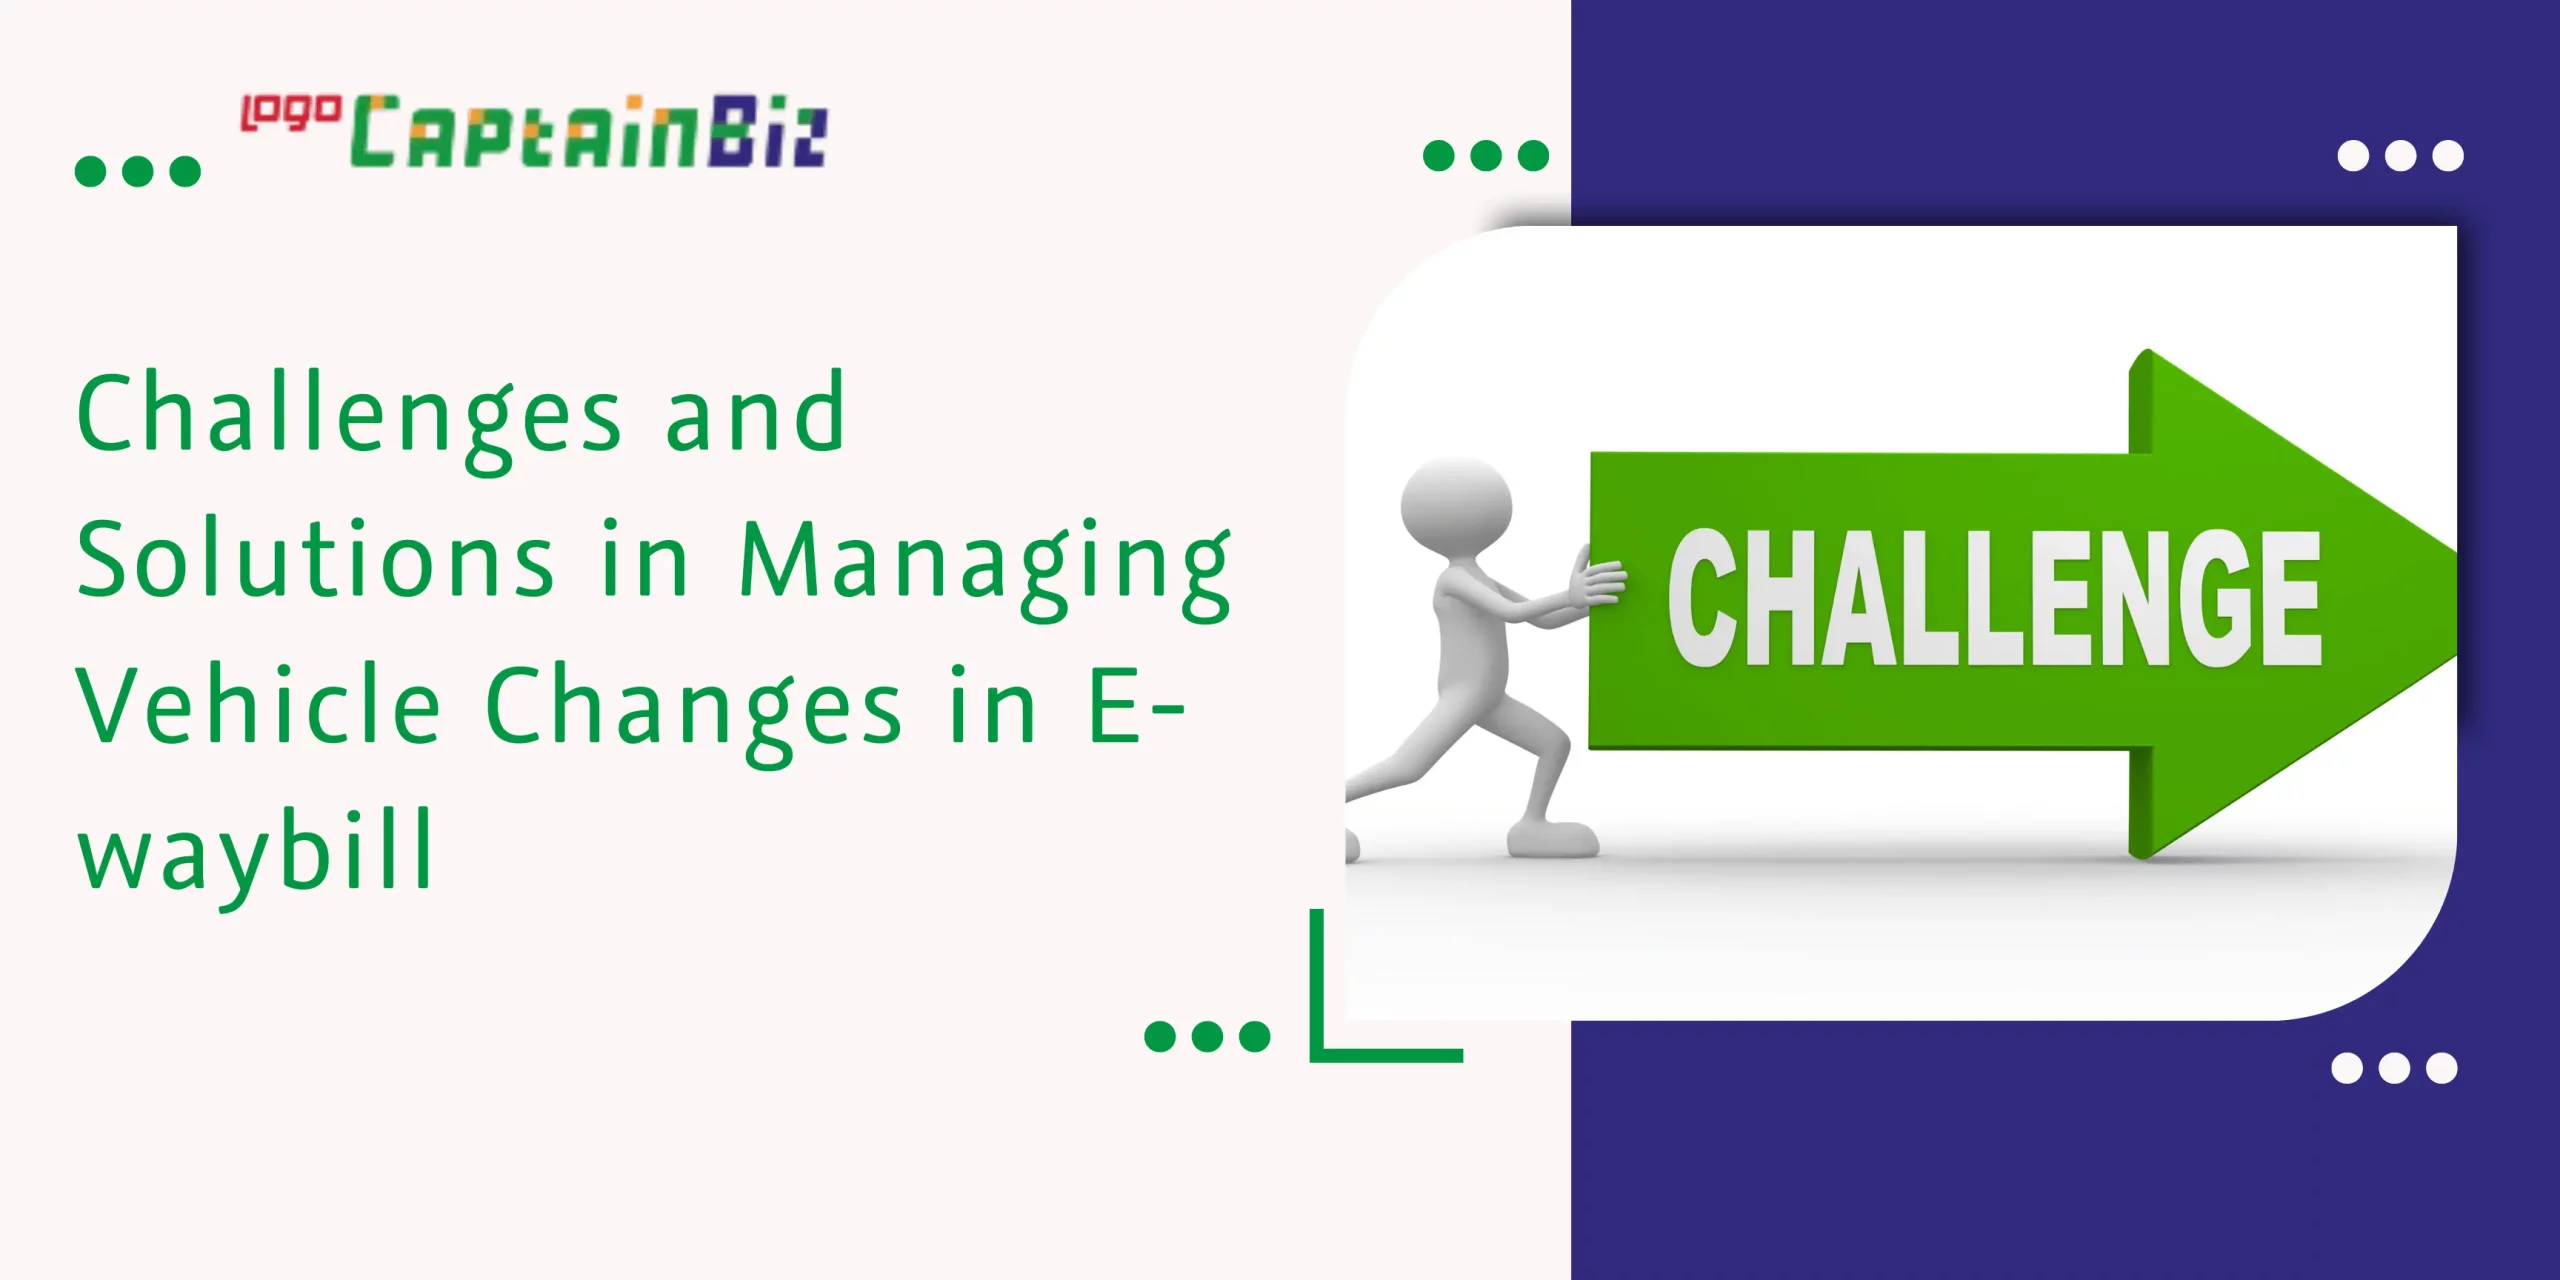 CaptainBiz: challenges and solutions in managing vehicle changes in e-waybill